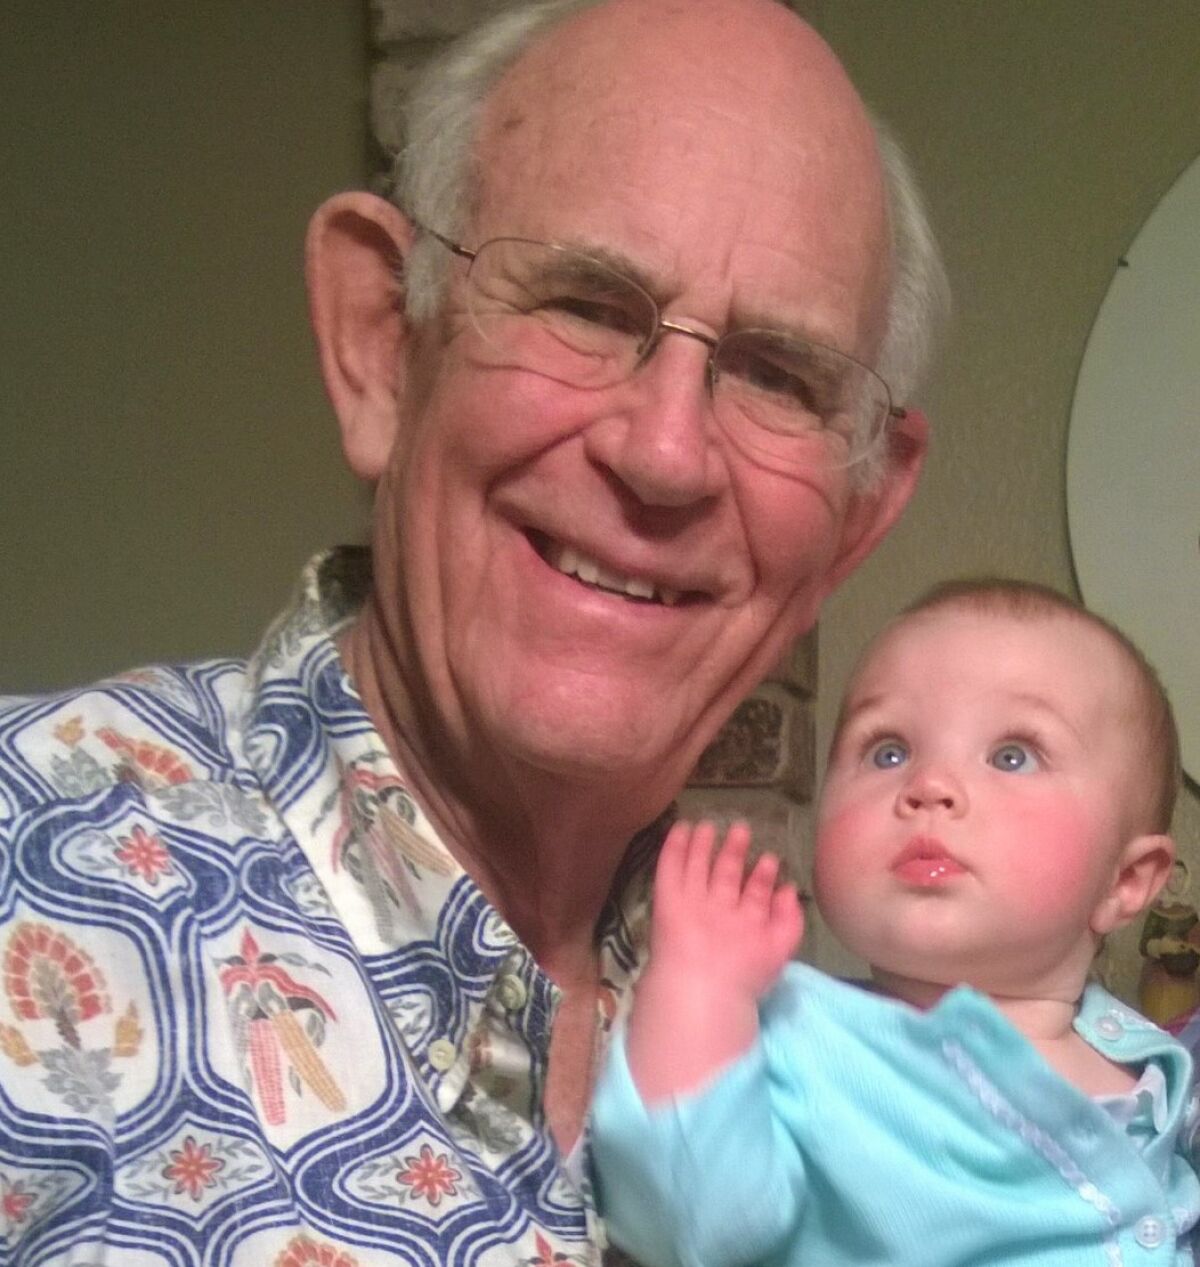 Retired physican Frederick Frye, 85, is pictured in 2015 with his great-granddaughter, Annabelle Mooney.